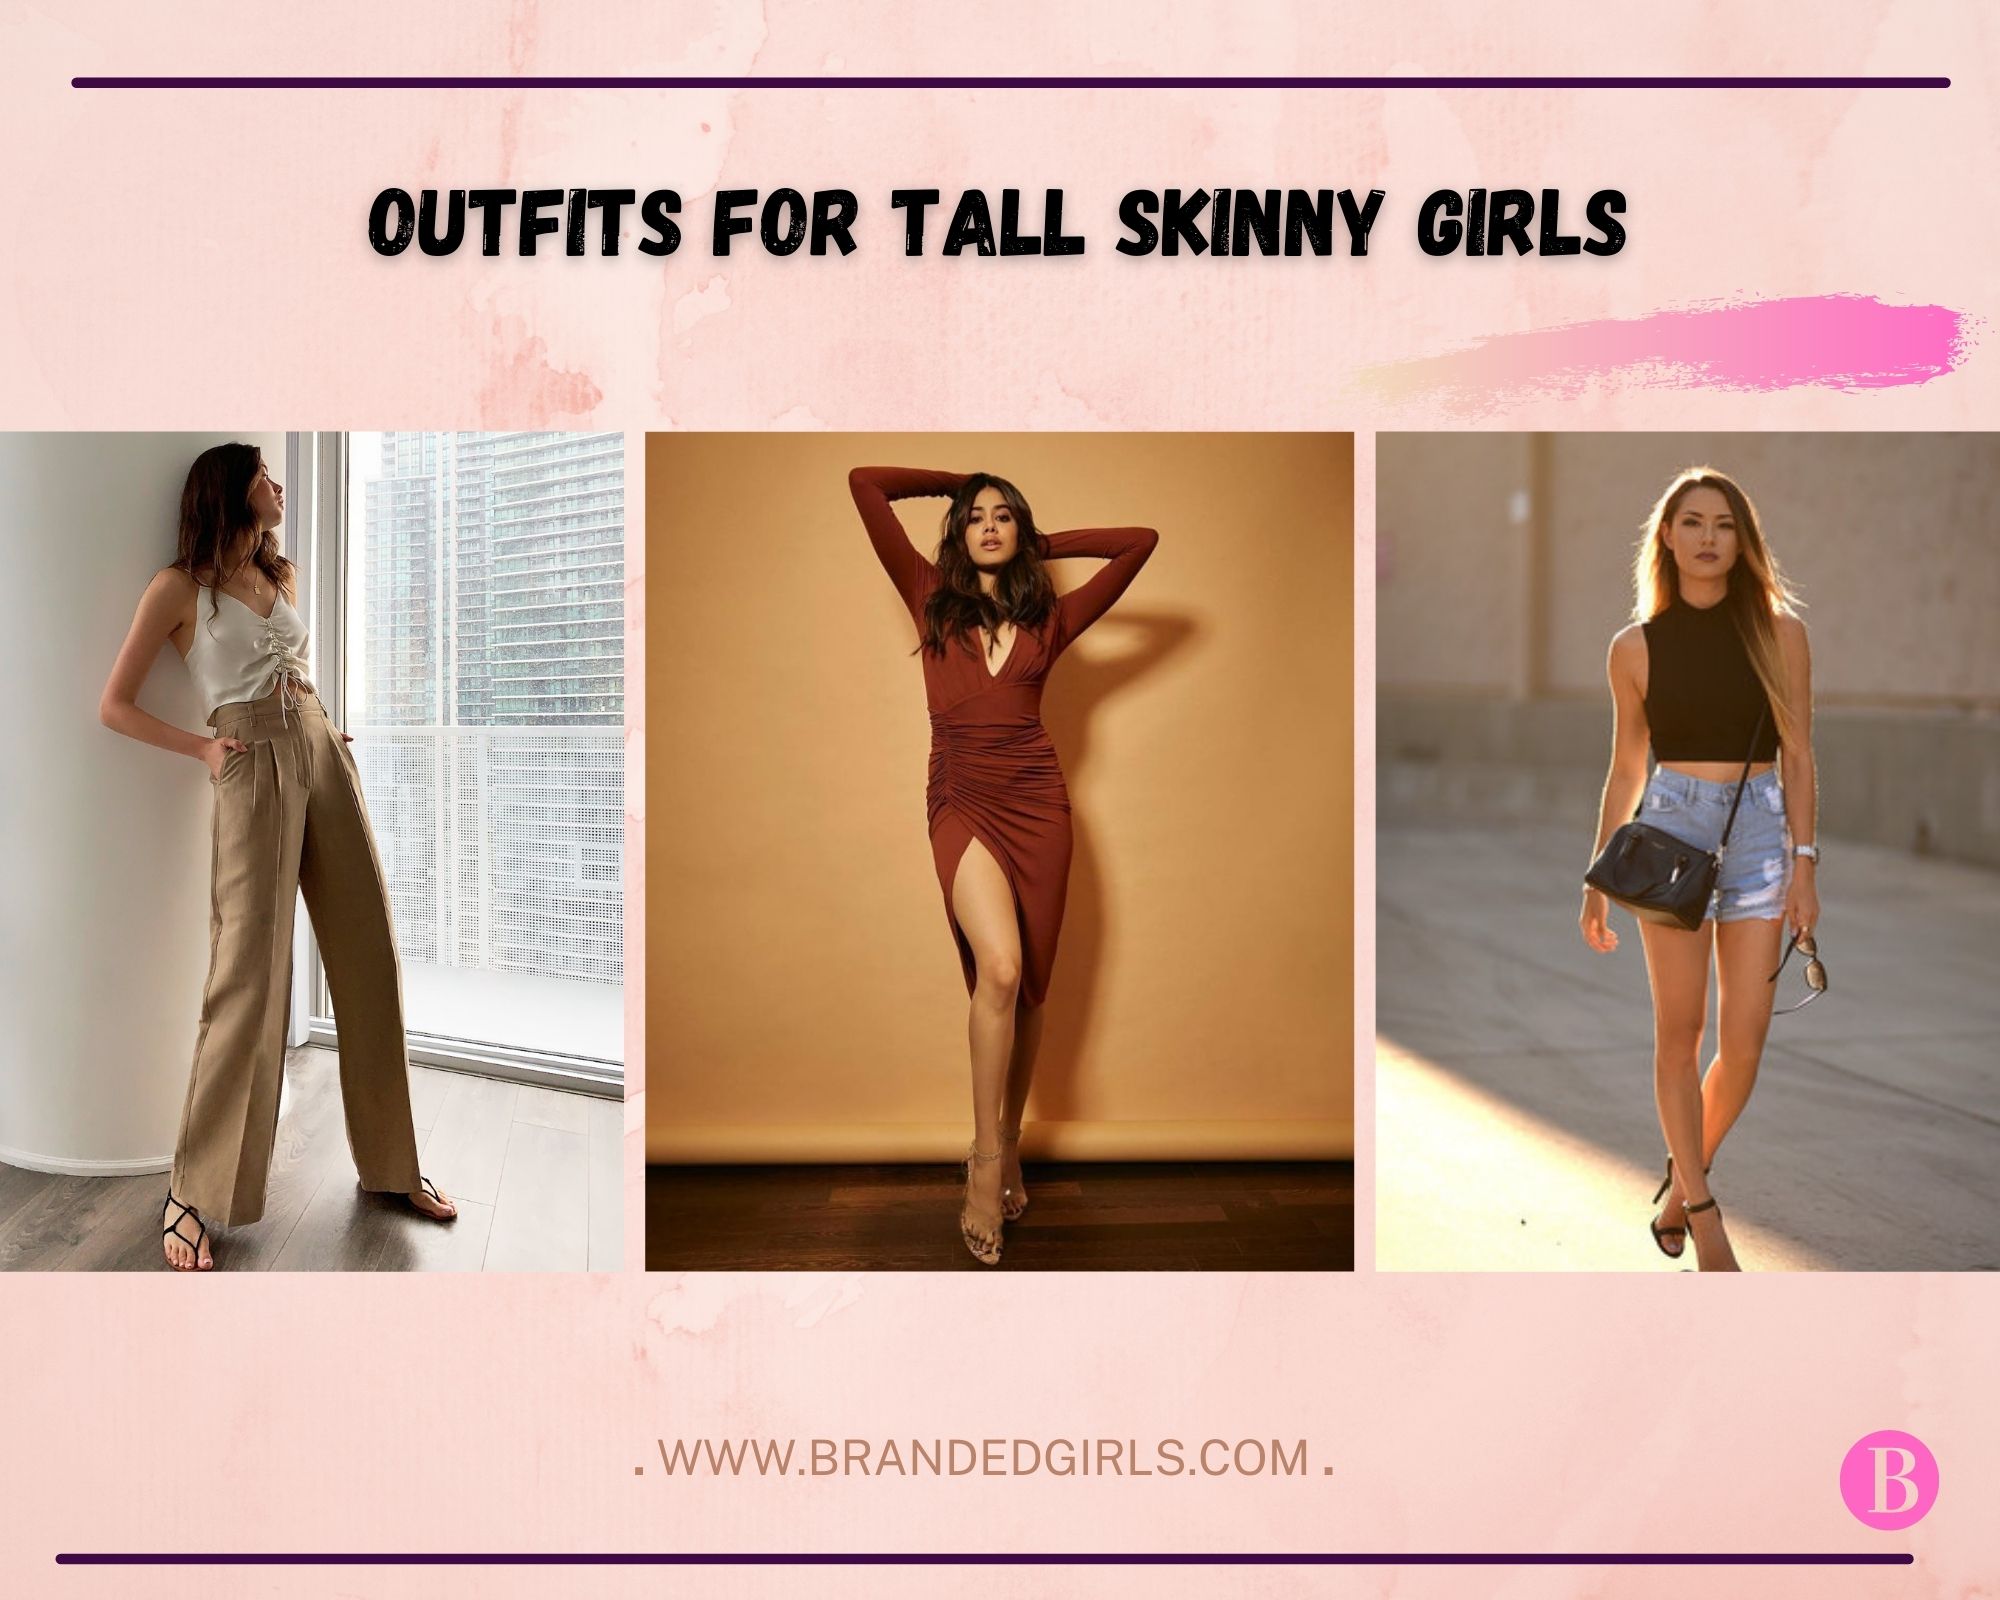 Which dress suits most for tall girls who are overweight? - Quora